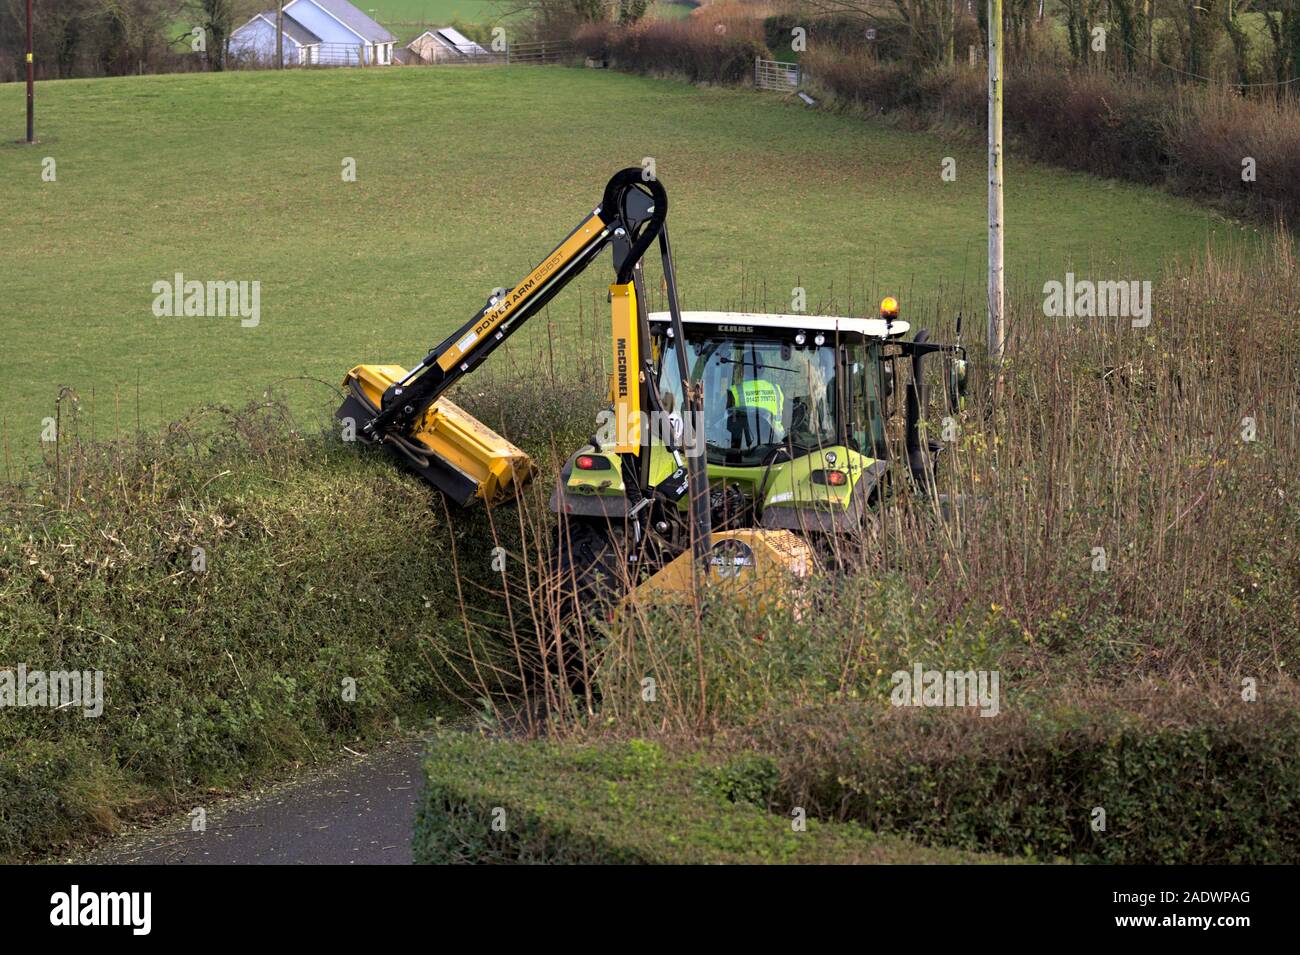 Aberystwyth Ceredigion Wales/UK December 04 2019: Yellow Tractor hedge cutting on a rural country lane, Stock Photo